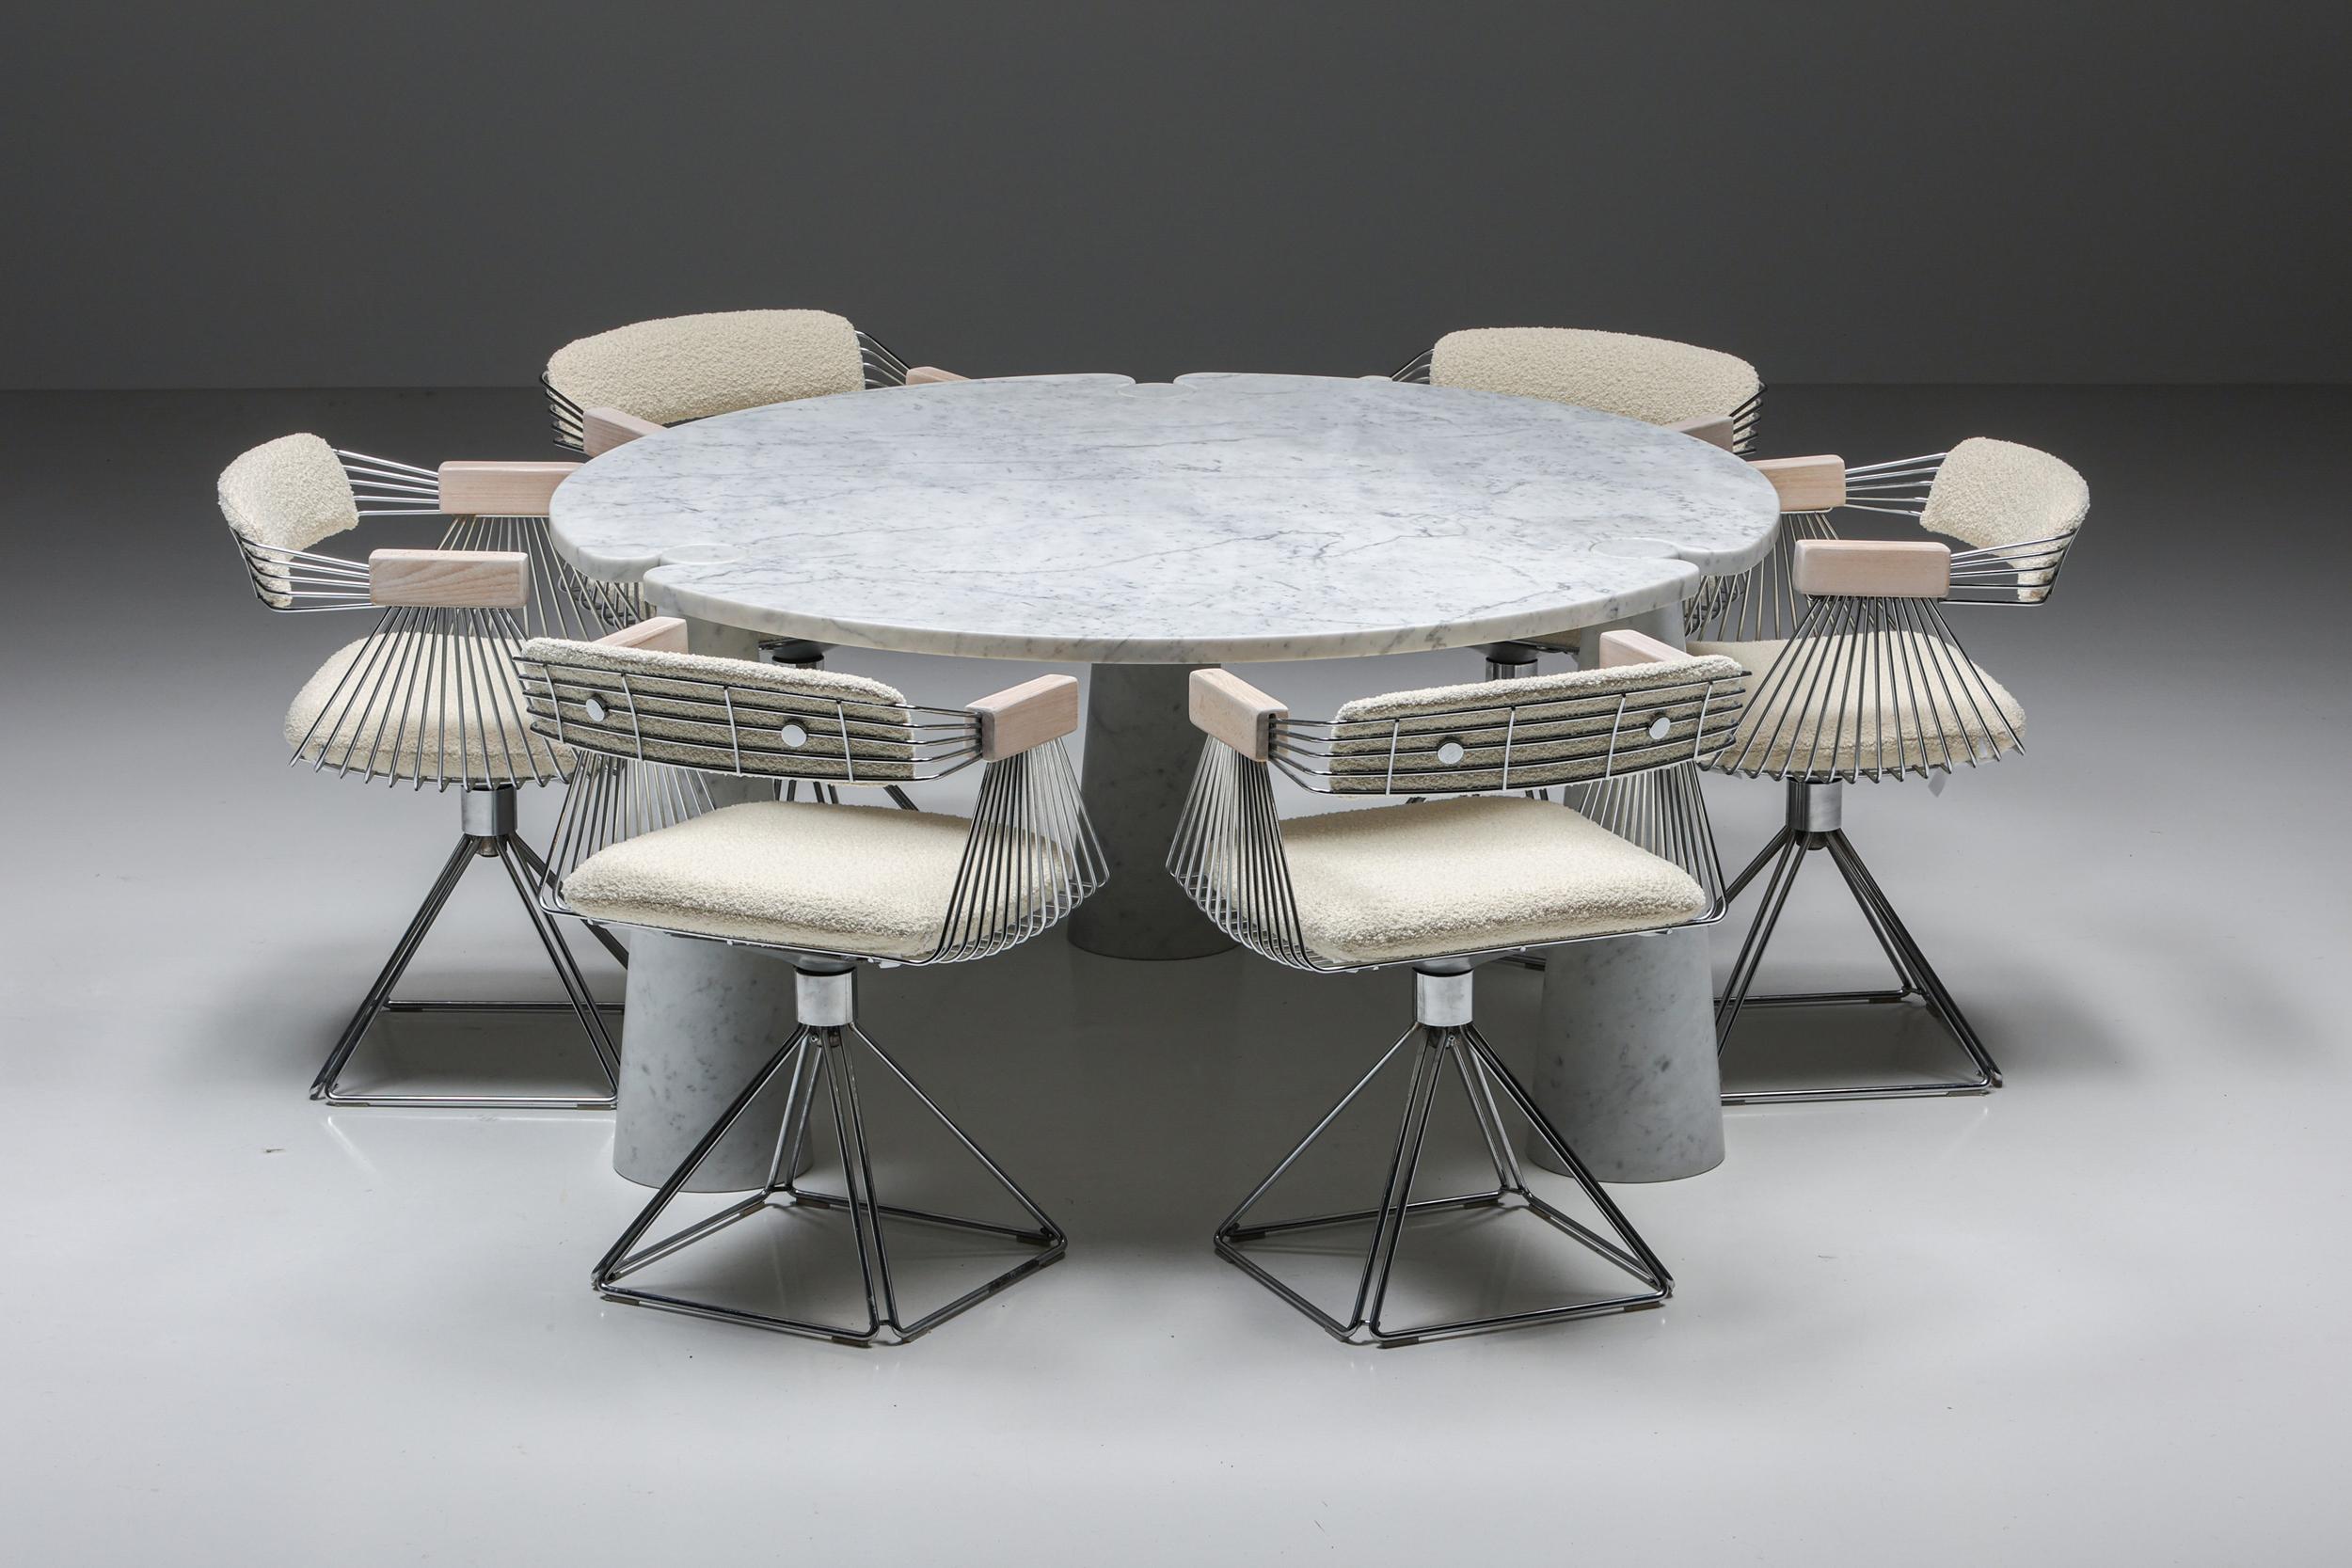 Angelo Mangiarotti, dining table ‘Eros’, round, white marble, the 1970s 

This sculptural table by Angelo Mangiarotti is a skillful example of postmodern design. The table is executed in white marble. The oval tabletop features no joints or clamps